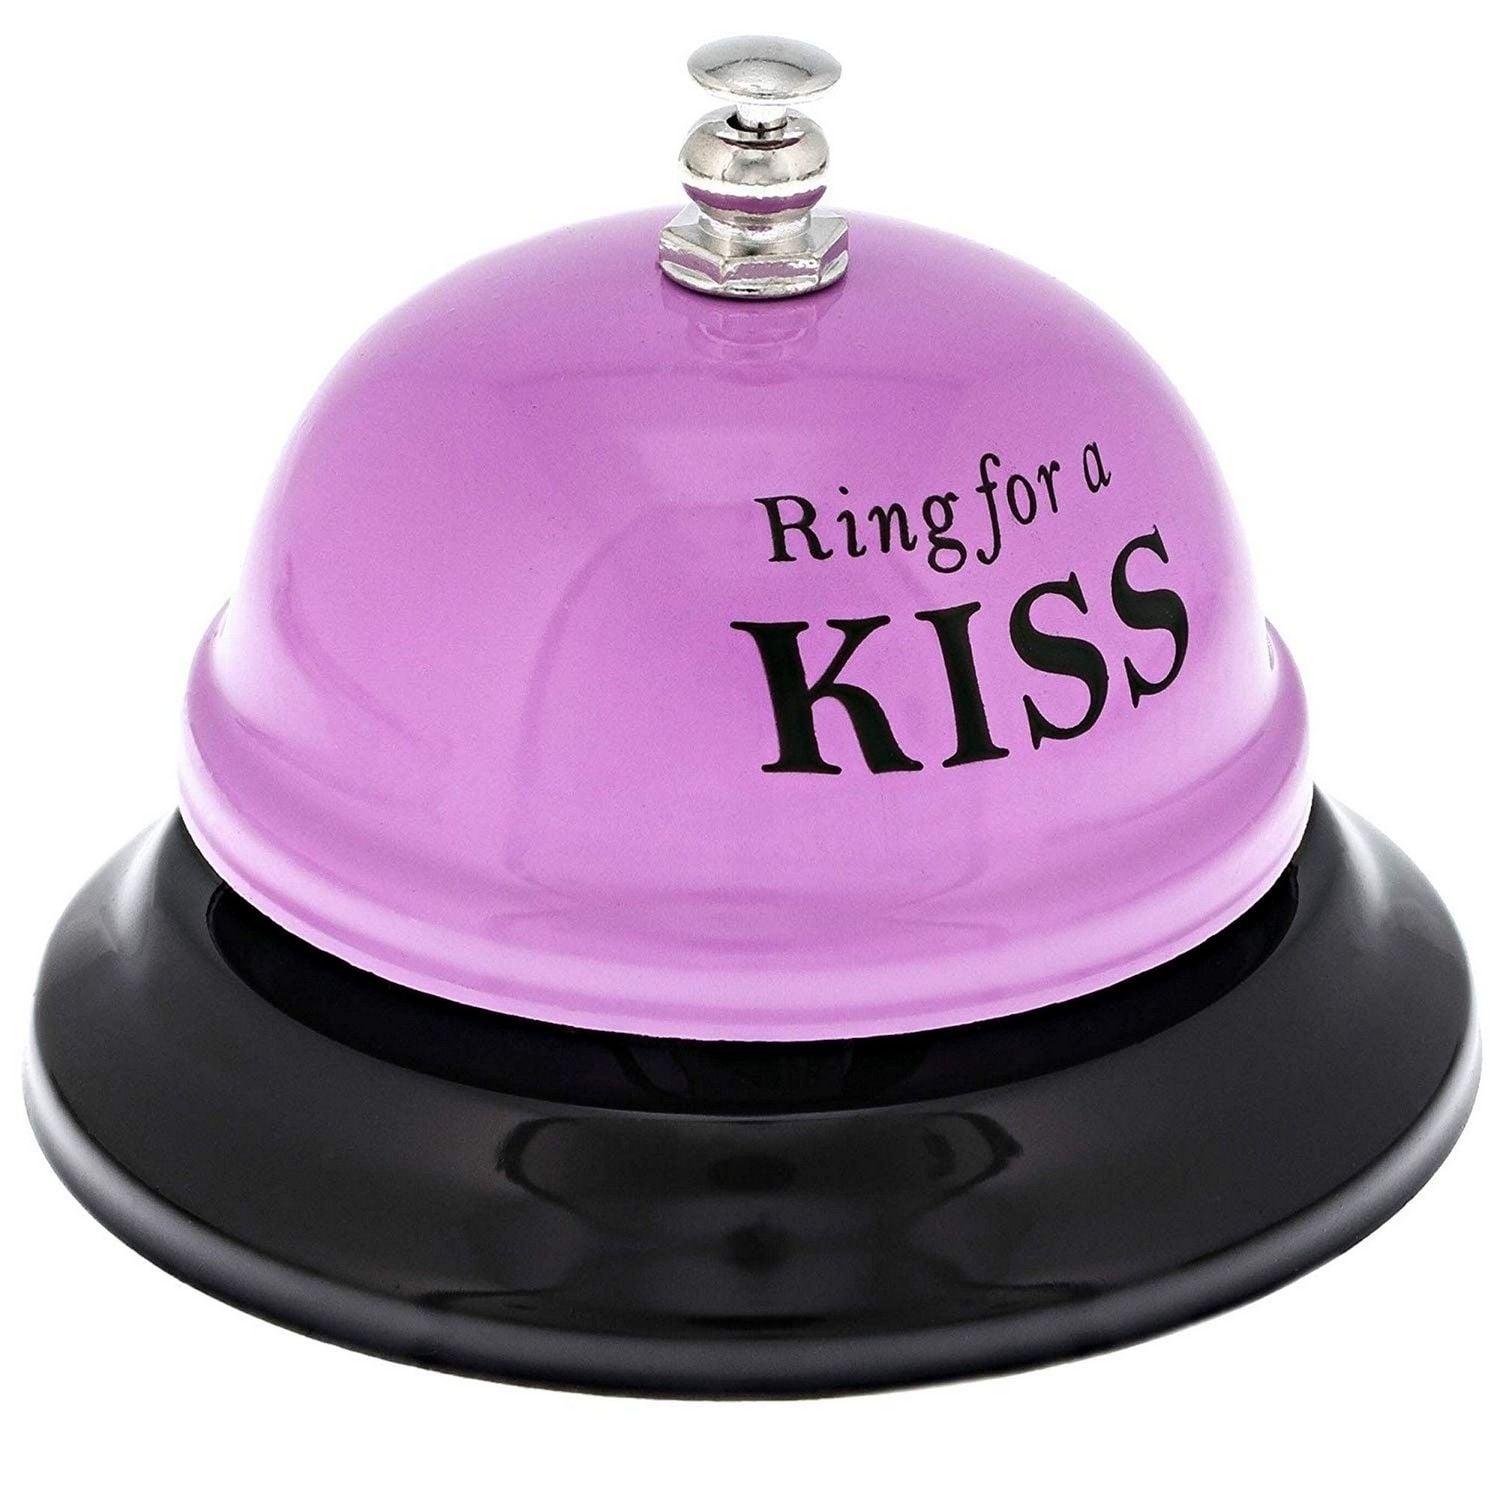 Shop Novelty Ring For Kiss Desk Bell Funny Gifts For Her